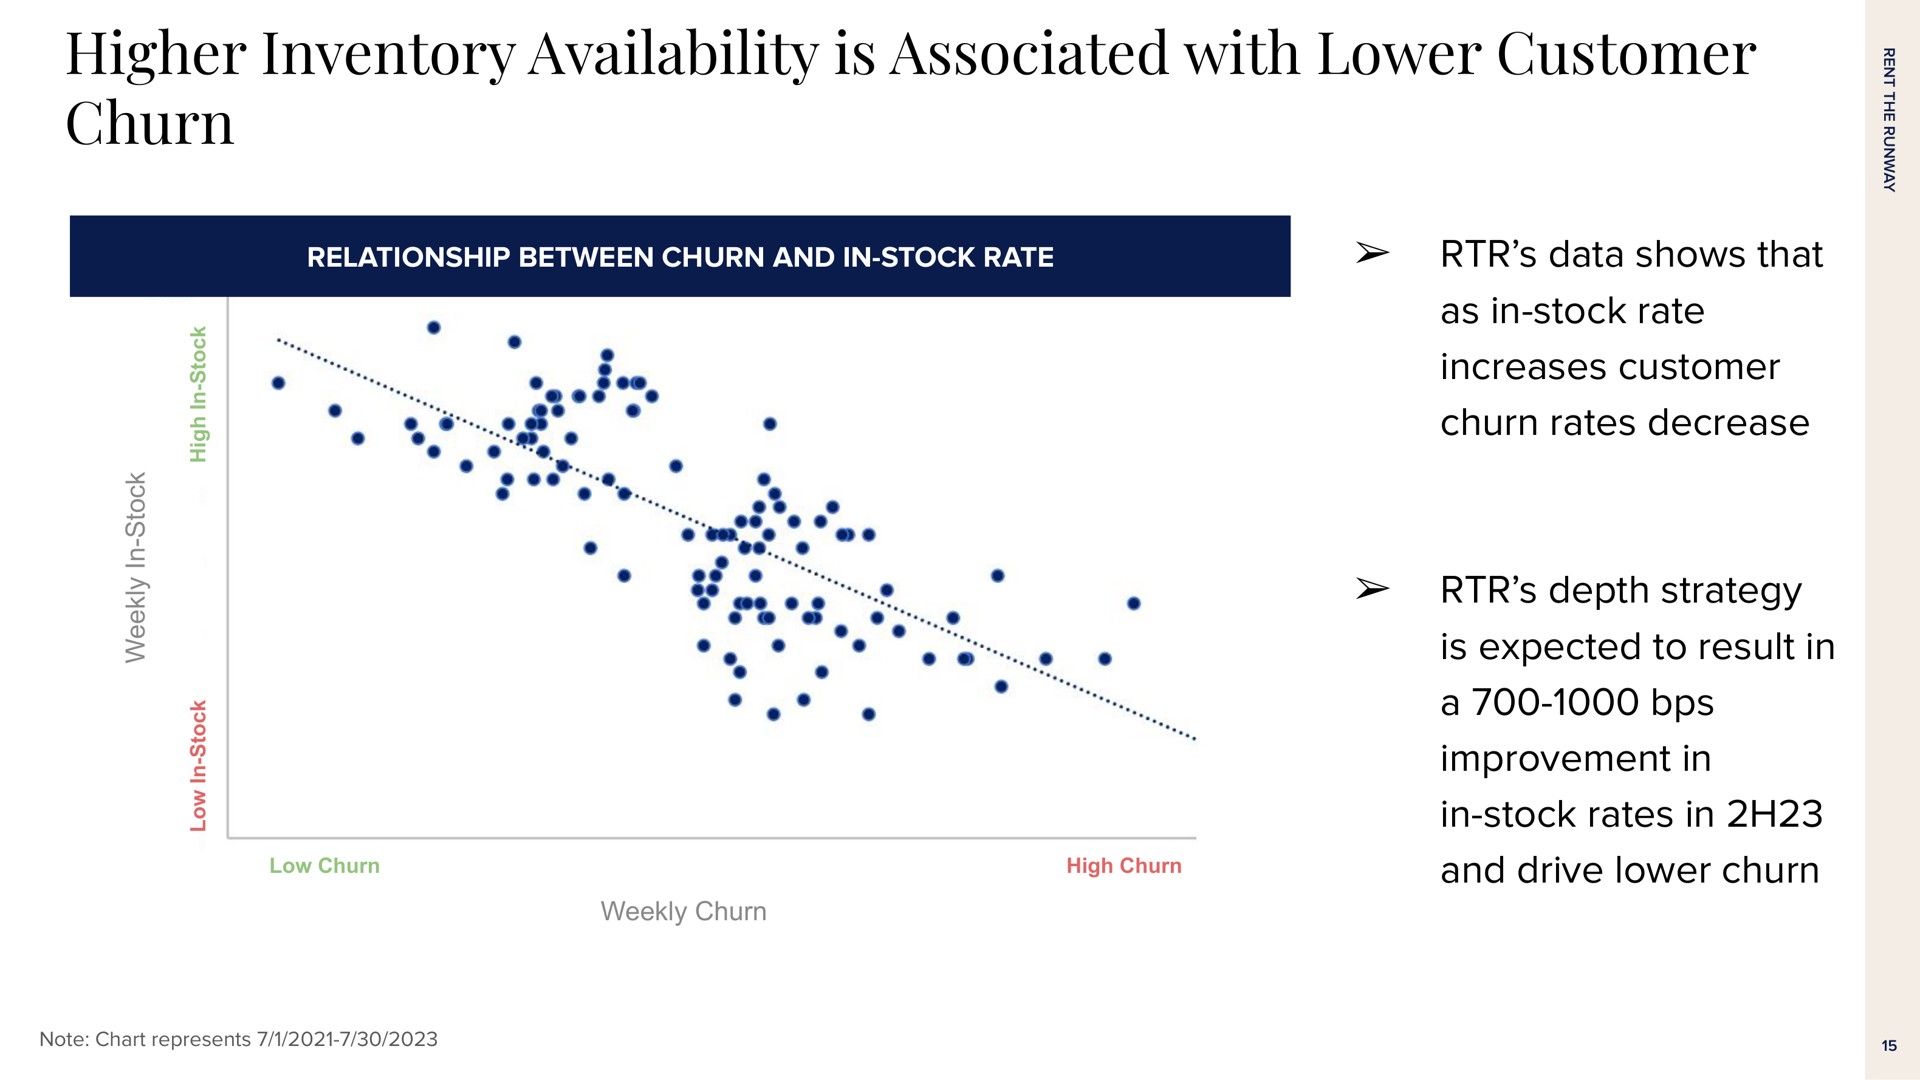 higher inventory availability is associated with lower customer churn data shows that as in stock rate increases customer churn rates decrease depth strategy is expected to result in a improvement in in stock rates in and drive lower churn | Rent The Runway